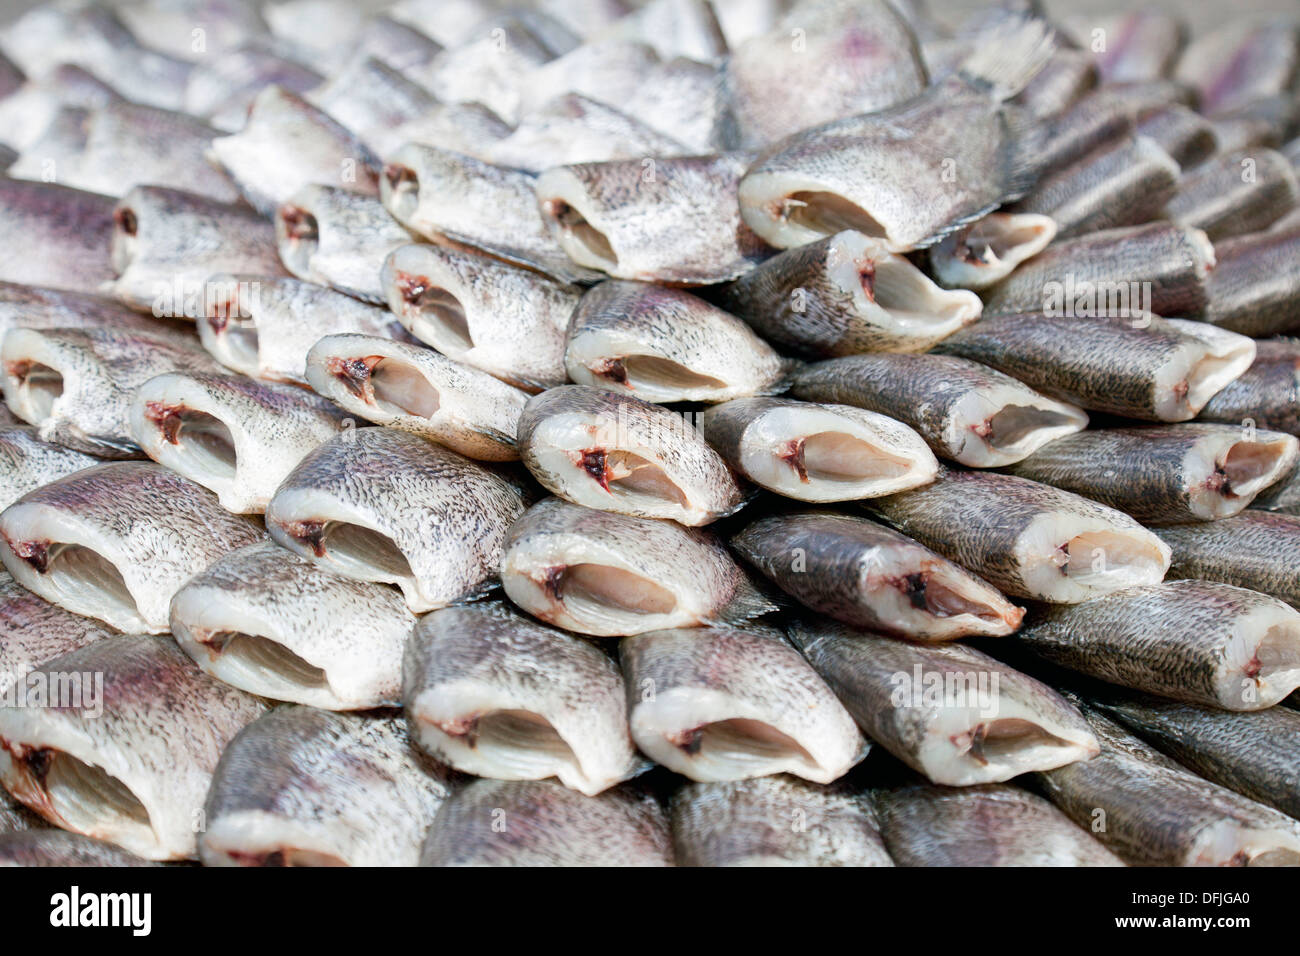 Stack of gutted river fish on sale, Bangkok, Thailand Stock Photo